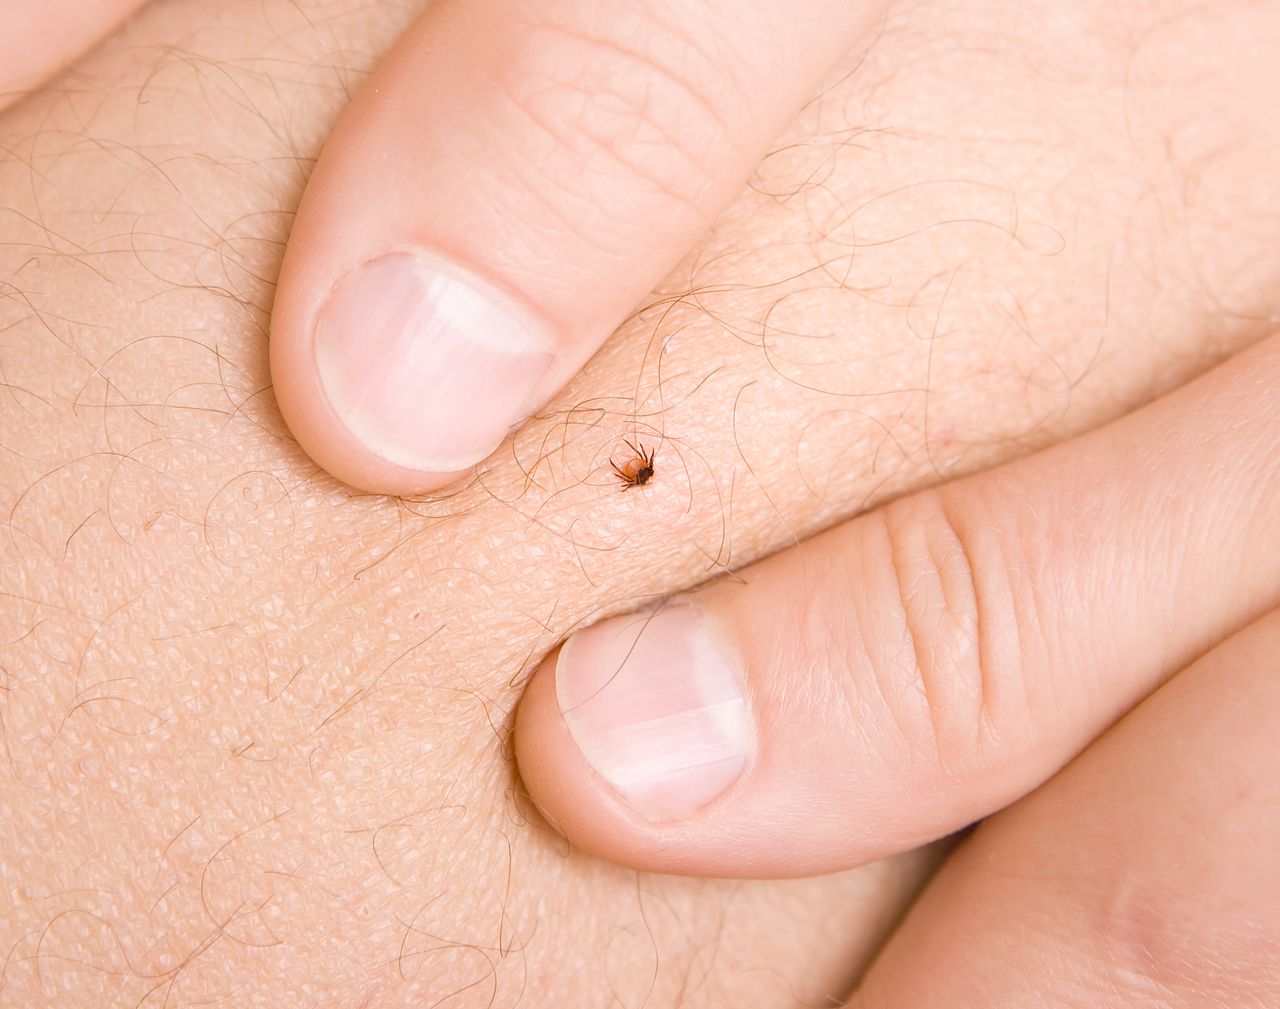 Summer ticks: how to stay safe from dangerous diseases